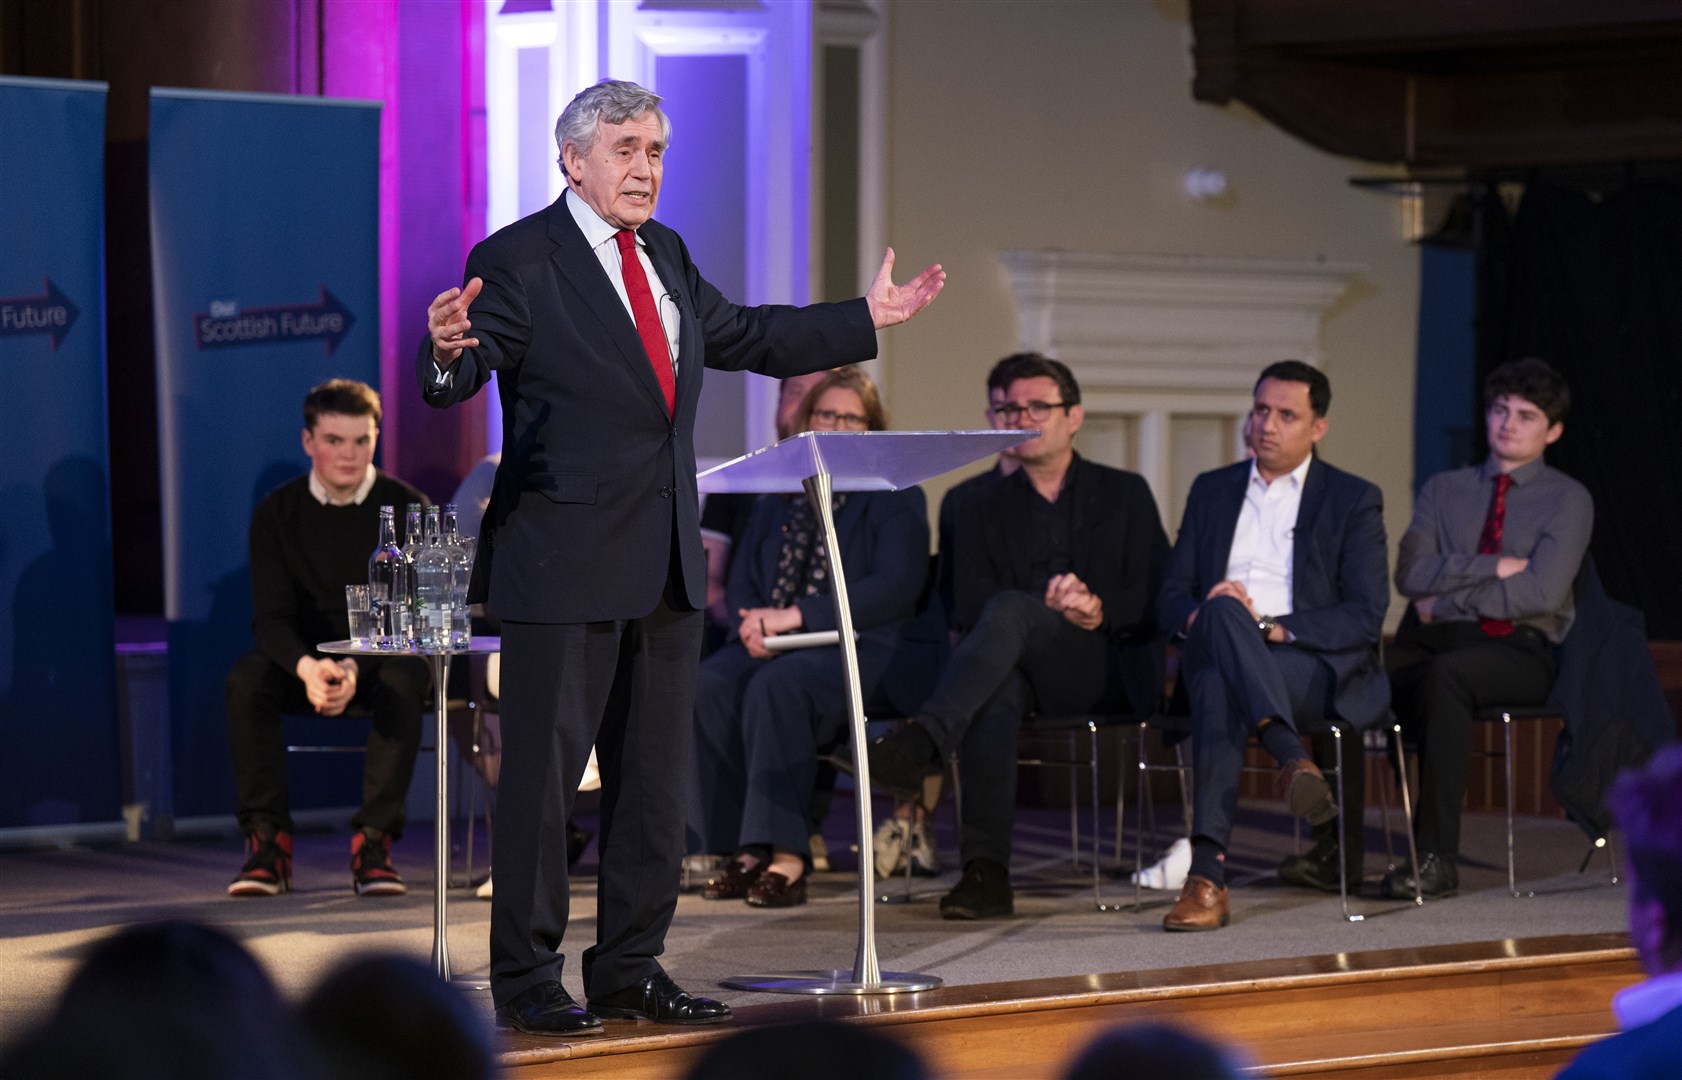 Gordon Brown during a ‘Making Britain Work For Scotland’ rally, organised by Our Scottish Future at Central Hall in Edinburgh (Jane Barlow/PA)